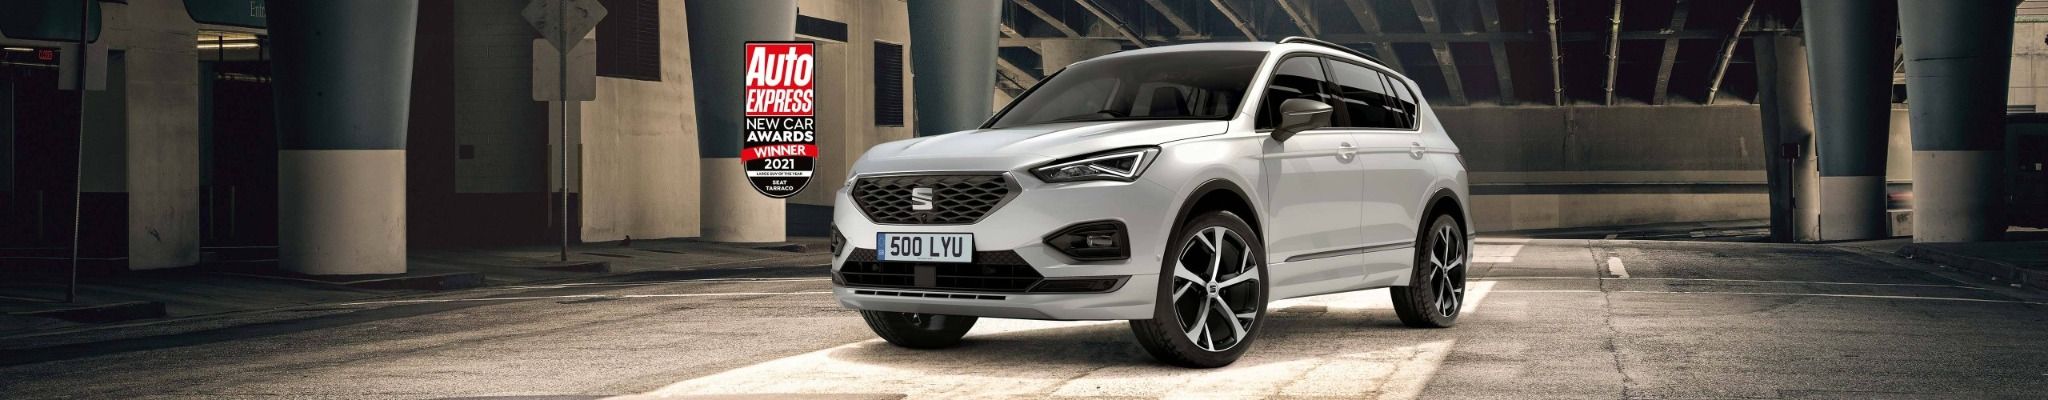 white seat tarraco parked in warehouse